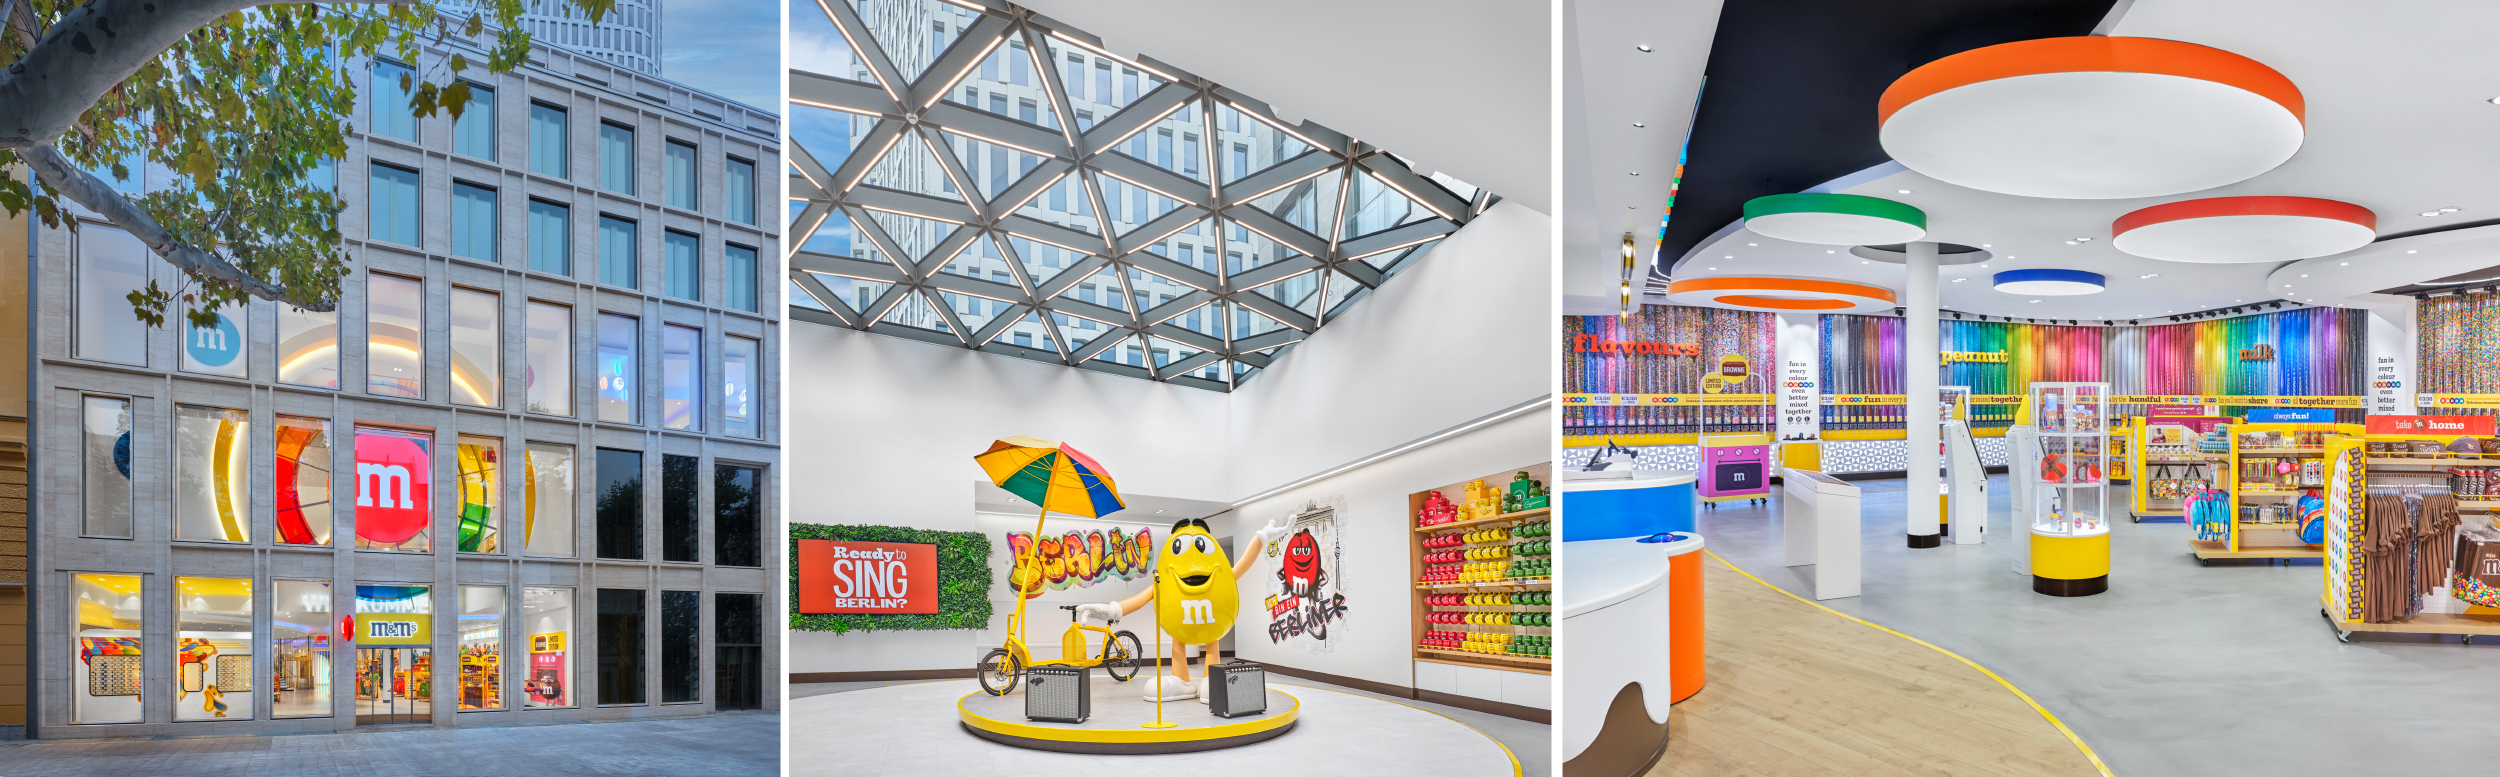 New M&M's Store Serves Up Eye Candy for Customers - Big Picture